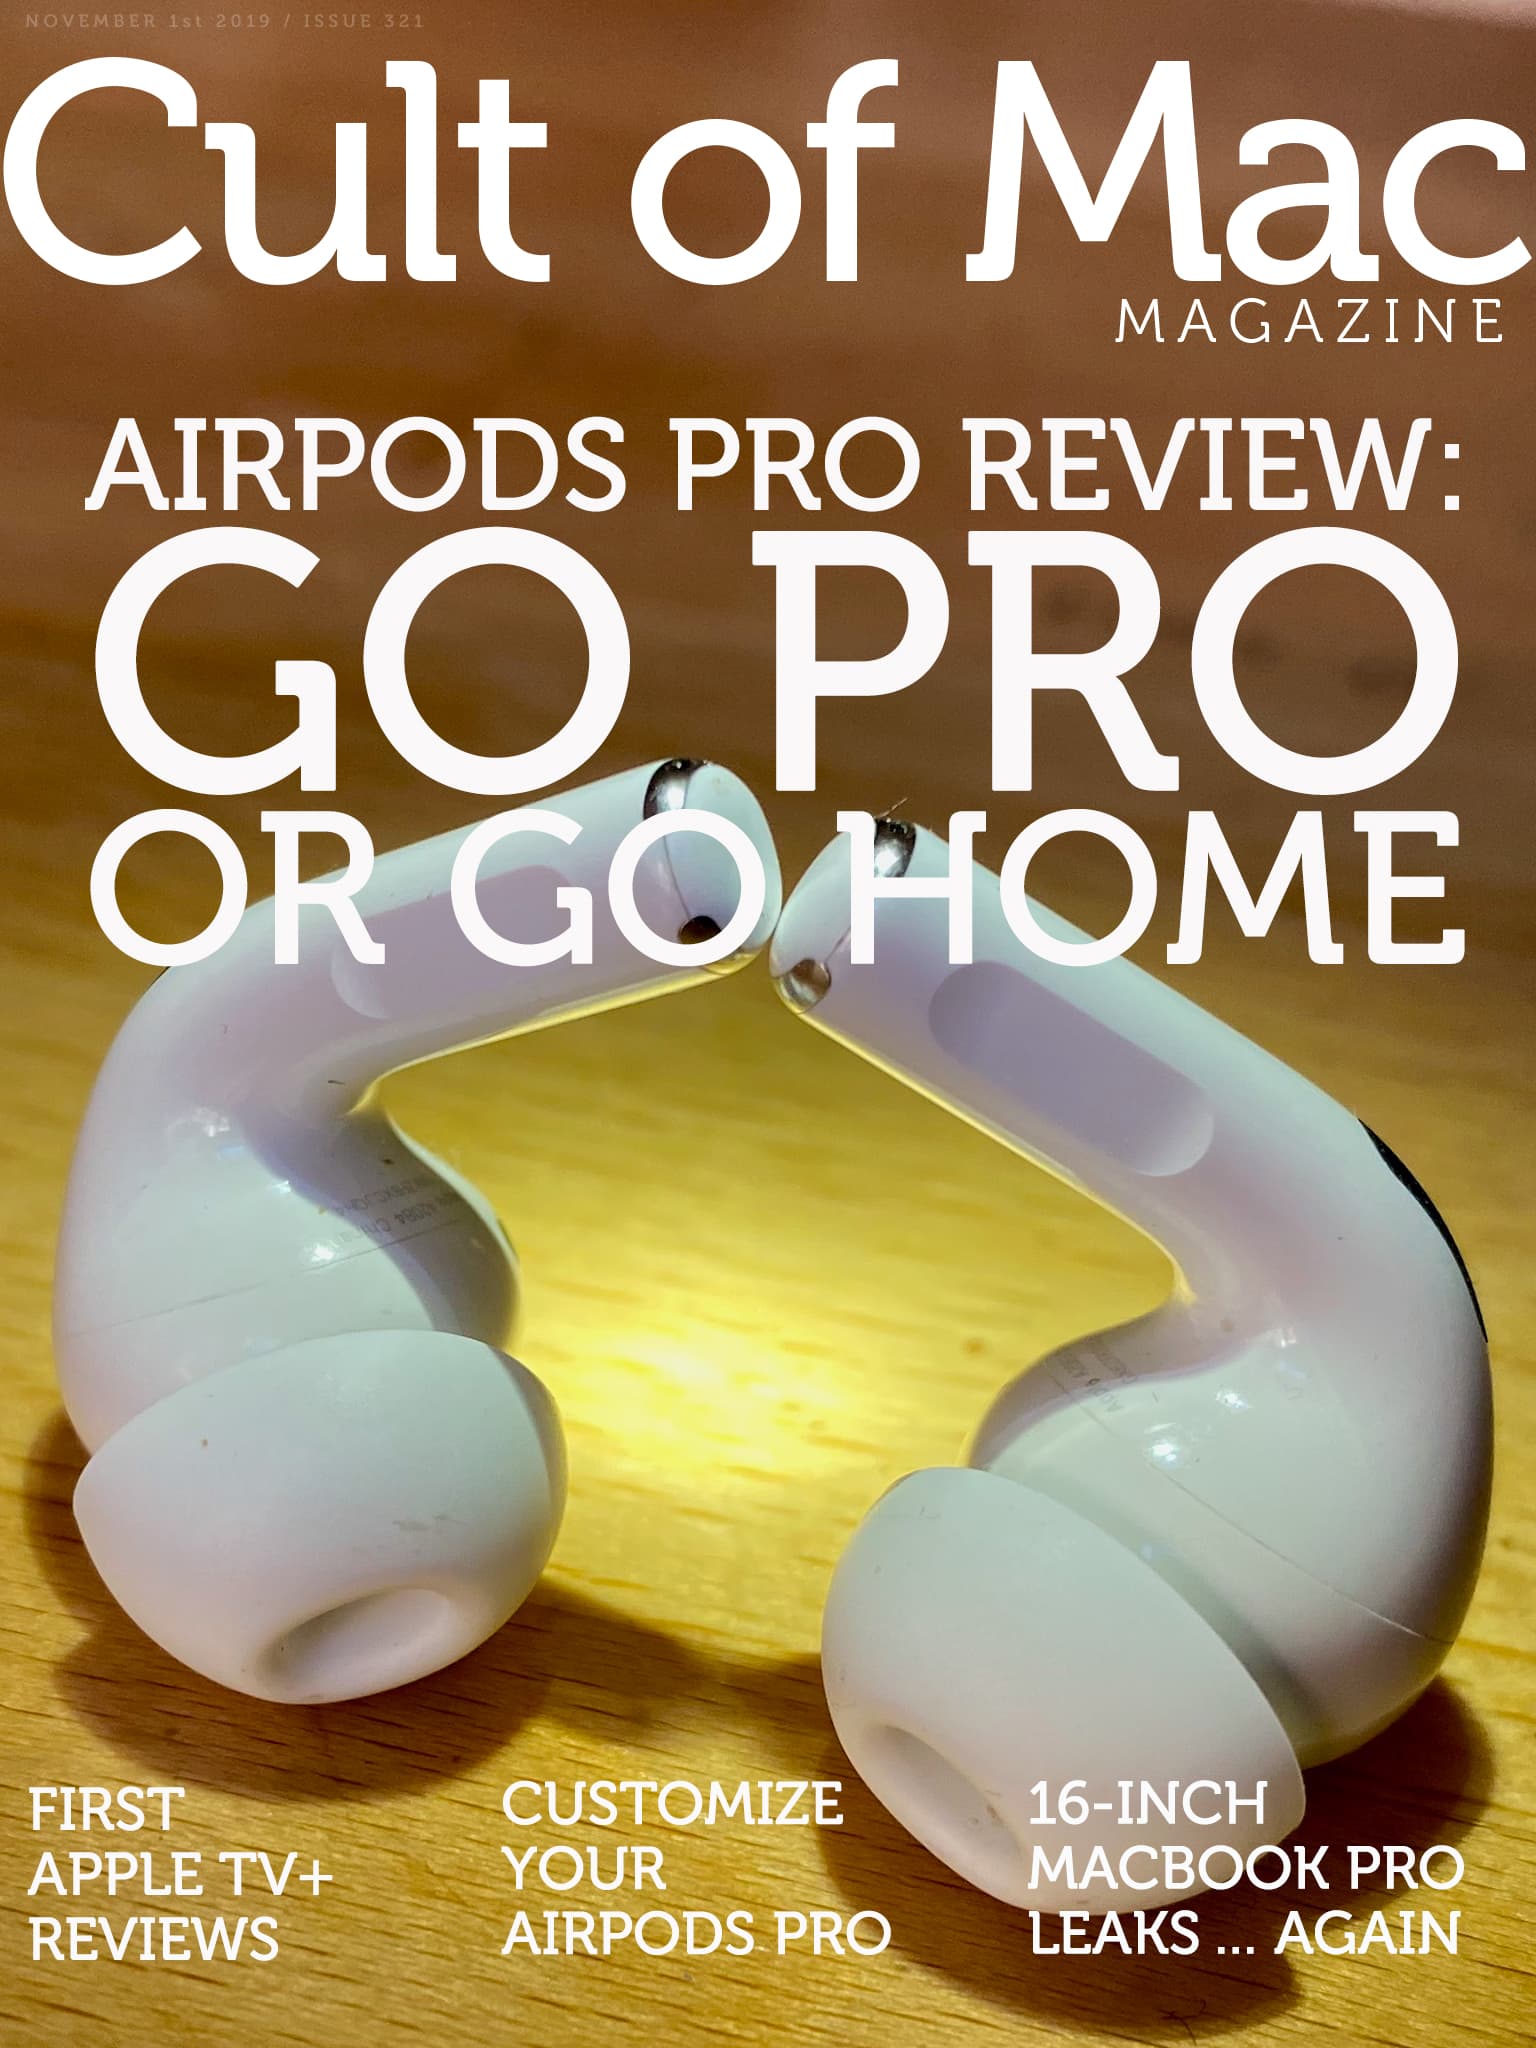 With AirPods Pro, the original AirPods just got far better.